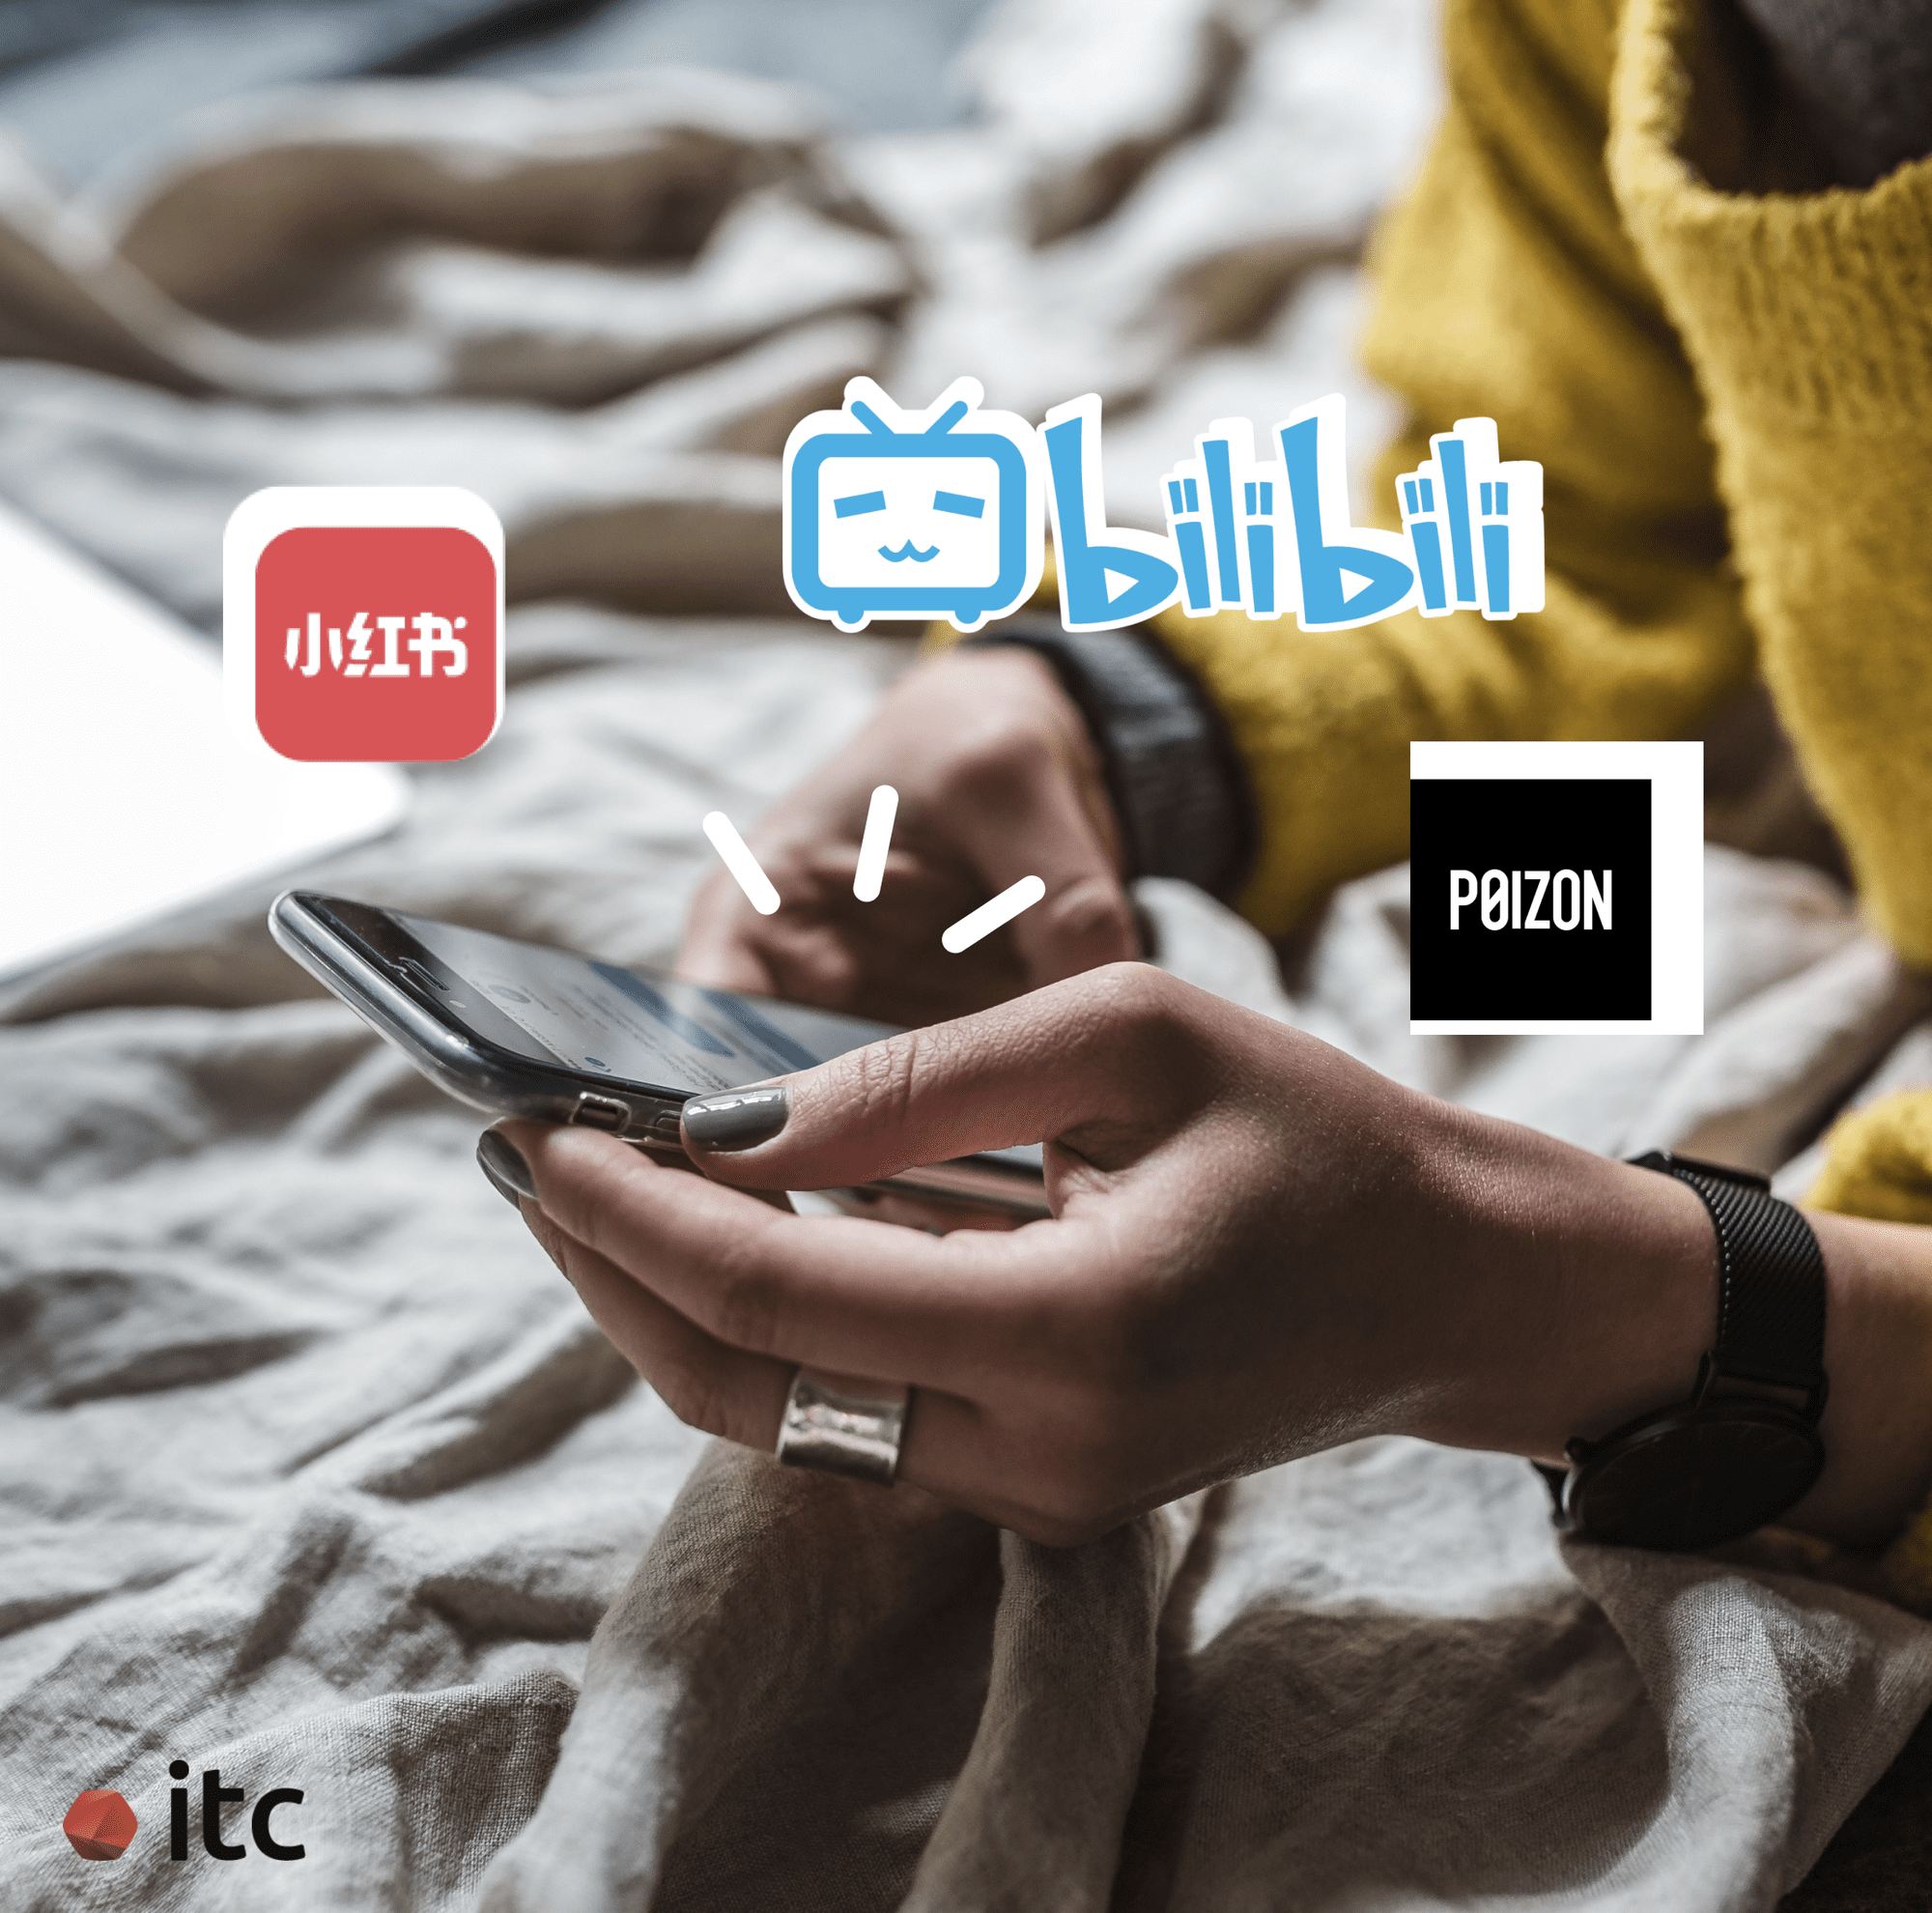 Cultural Opinion Leaders (COLs) are adopting and dominating new social media sites like Xiaohongshu, Bilibili, and Poizon